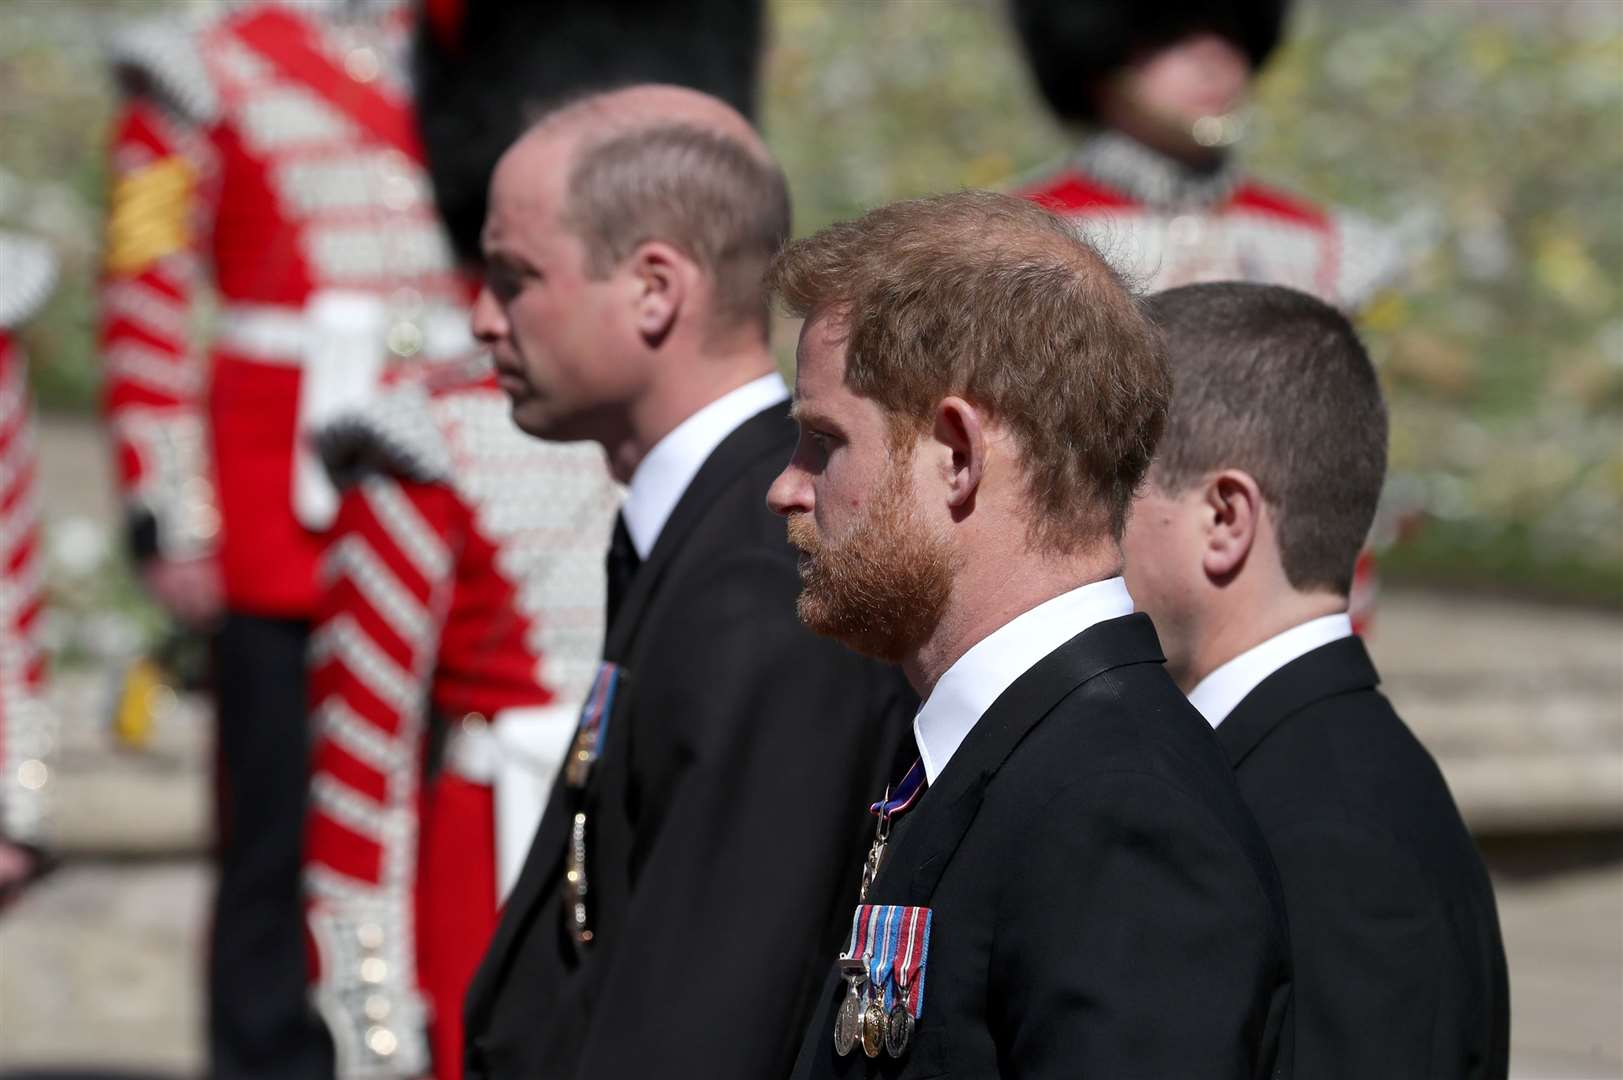 The Duke of Cambridge and the Duke of Sussex walk behind the coffin on its way to the chapel (Gareth Fuller/PA)